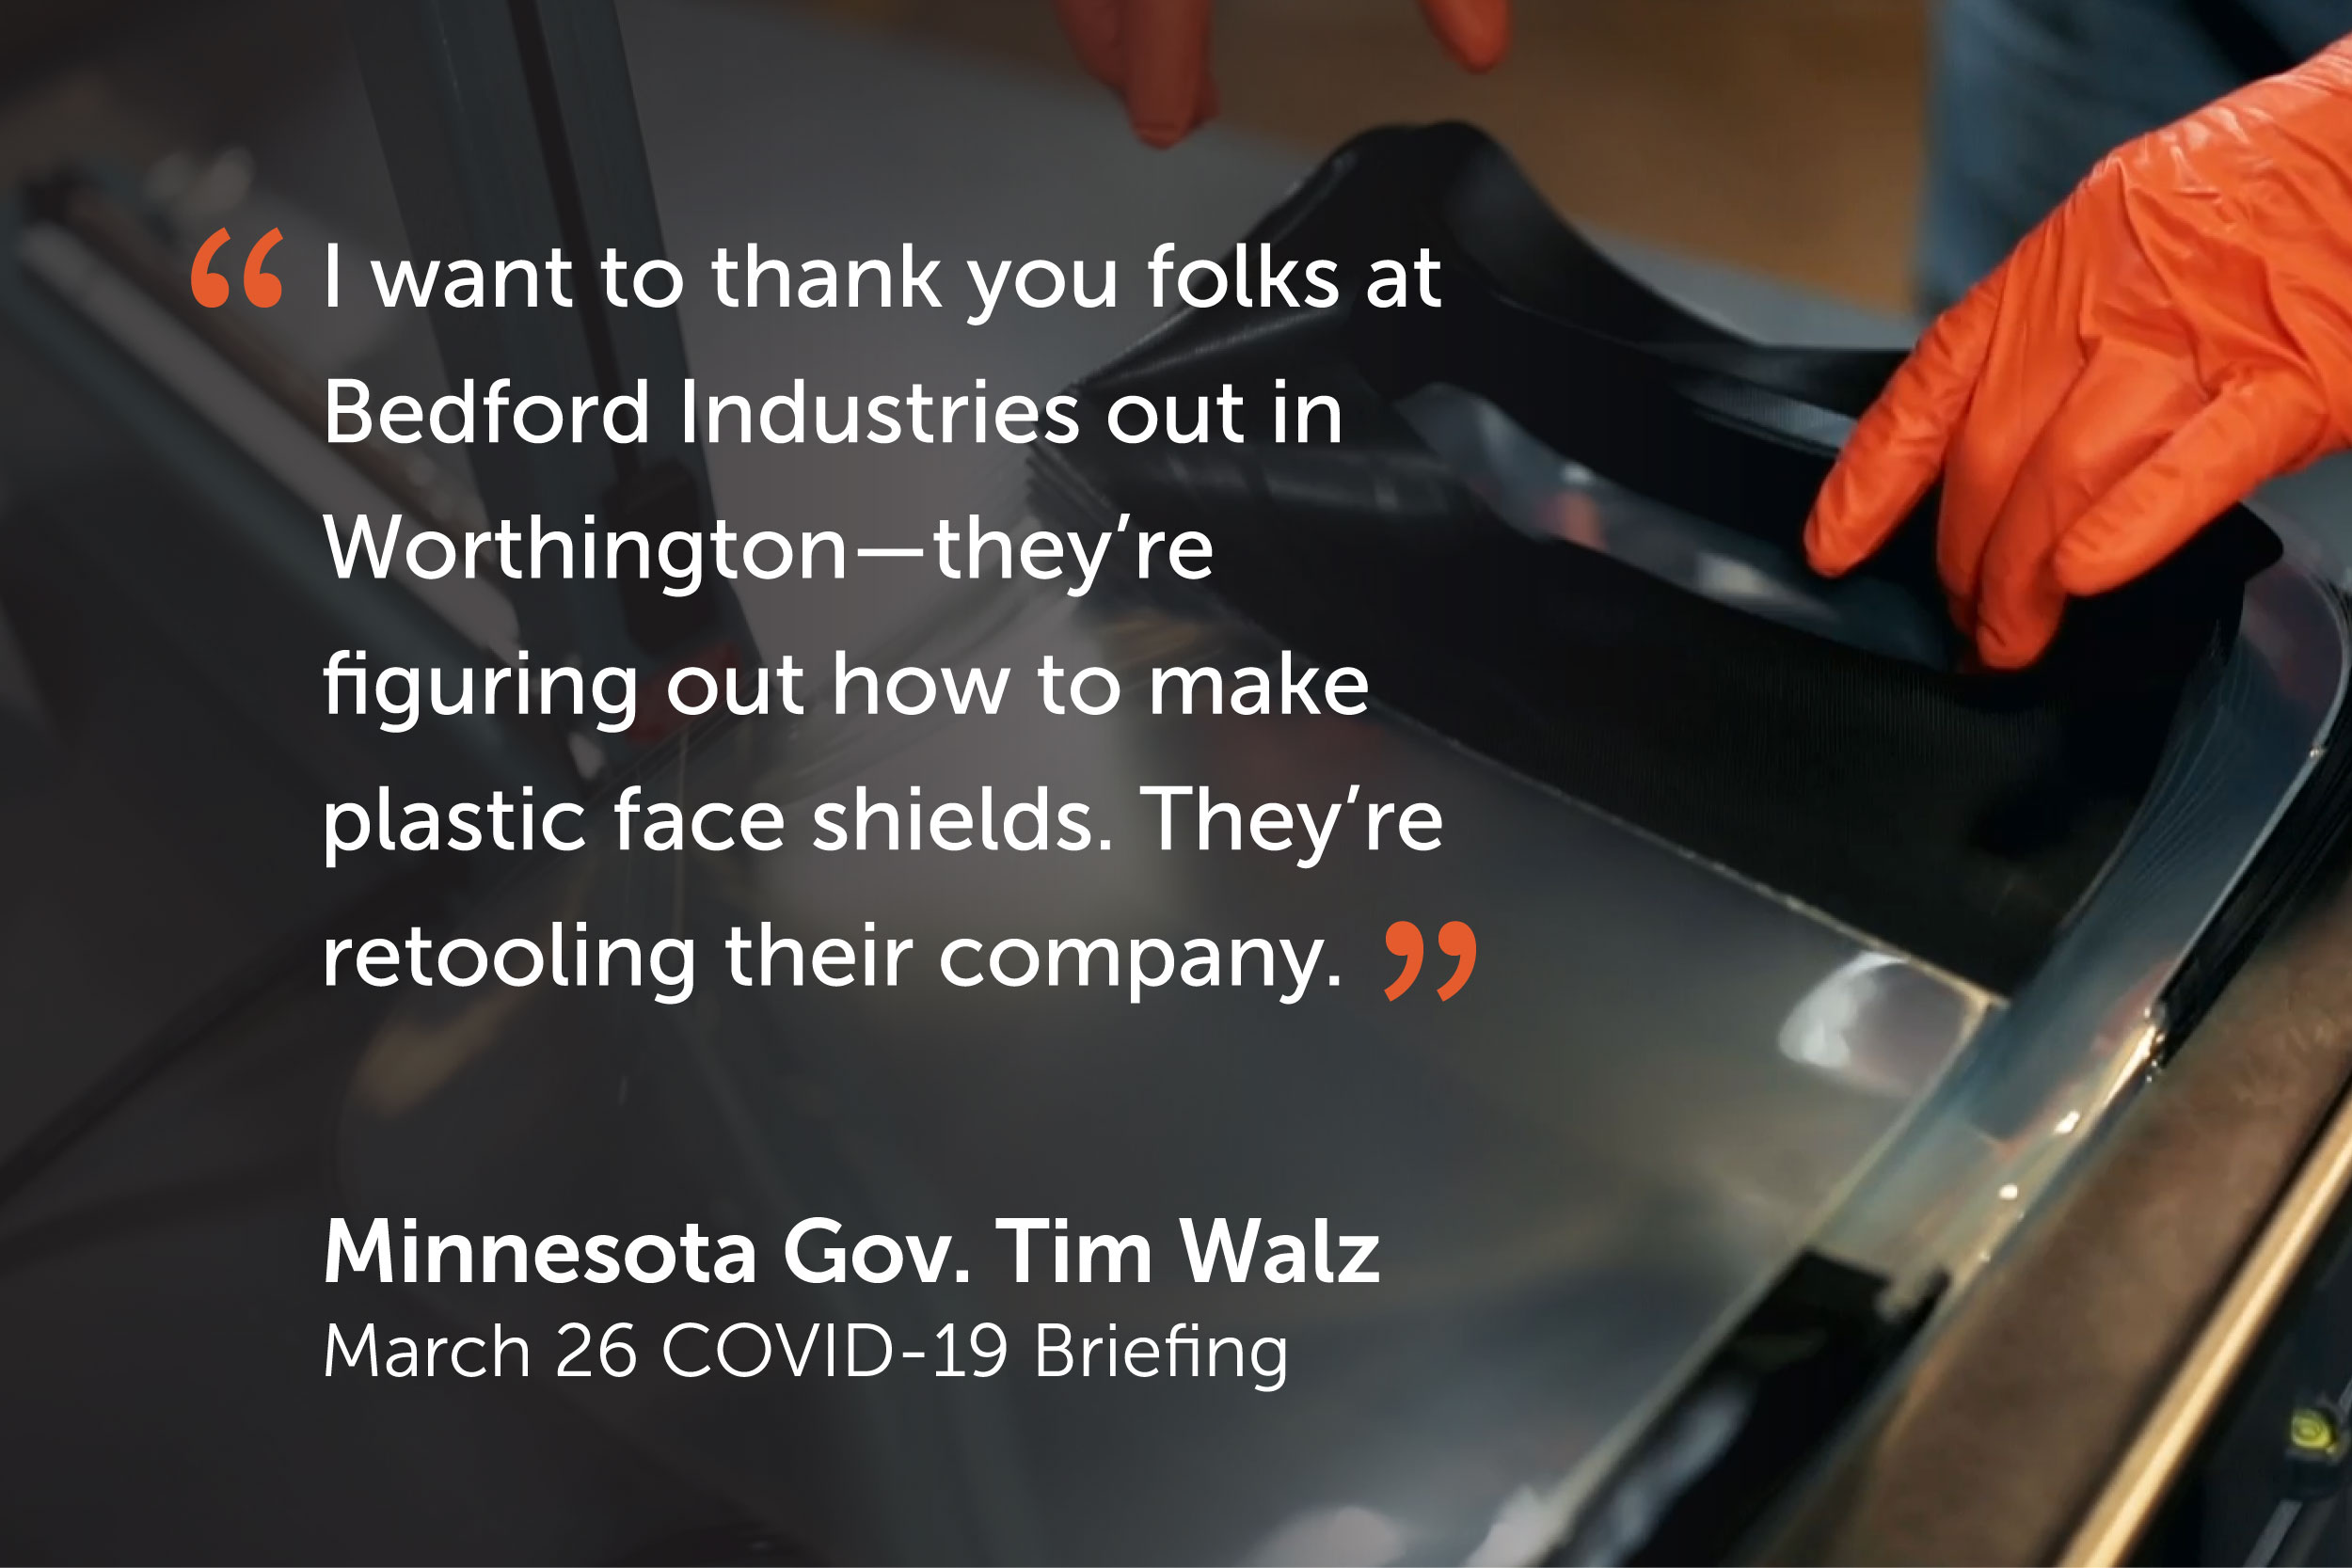 Orange-gloved hands grab a stack of face shields and a quote from Minnesota’s governor applauds Bedford’s PPE development